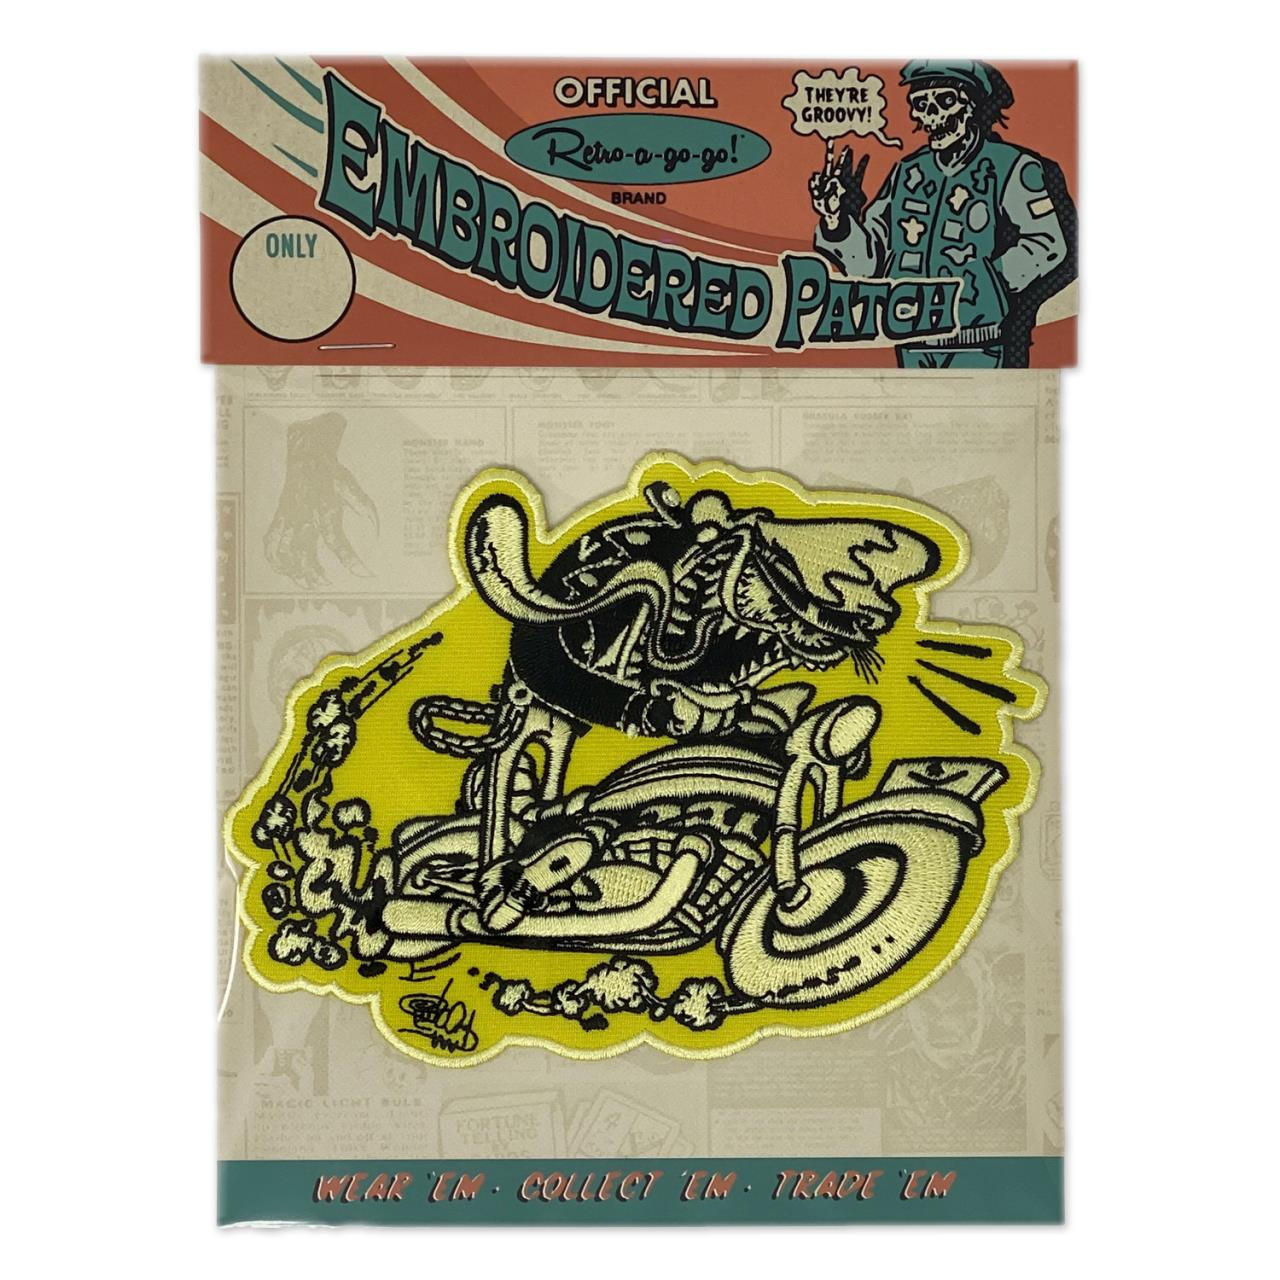 Cycle Freak Patch - 0659682807911